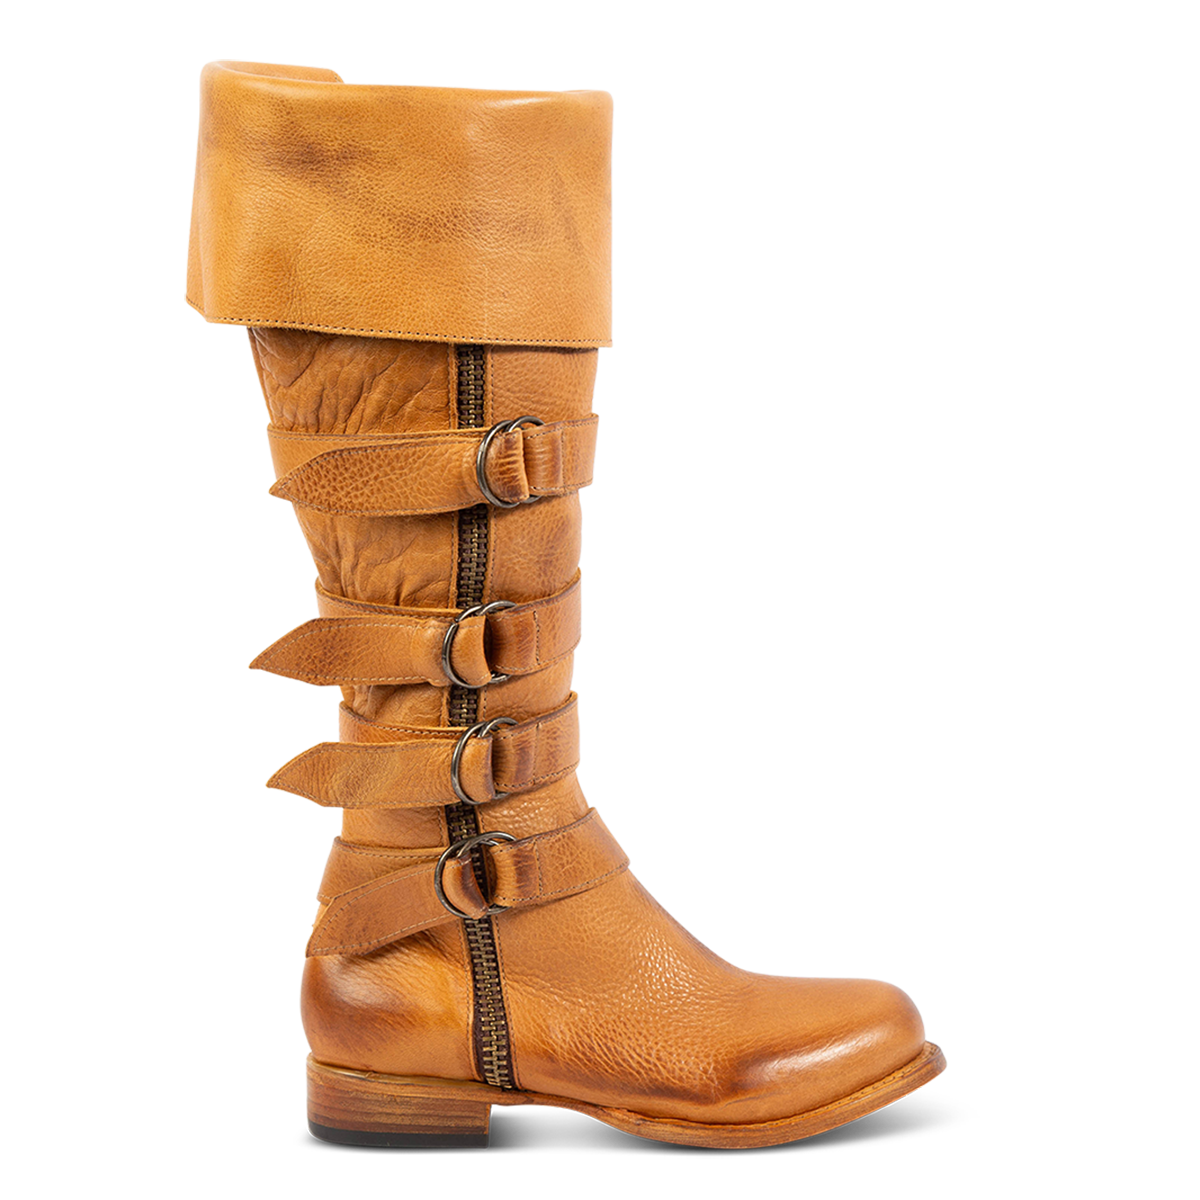 FREEBIRD women's Risky wheat fold-over tall leather boot with buckle loop detailing and zip closures